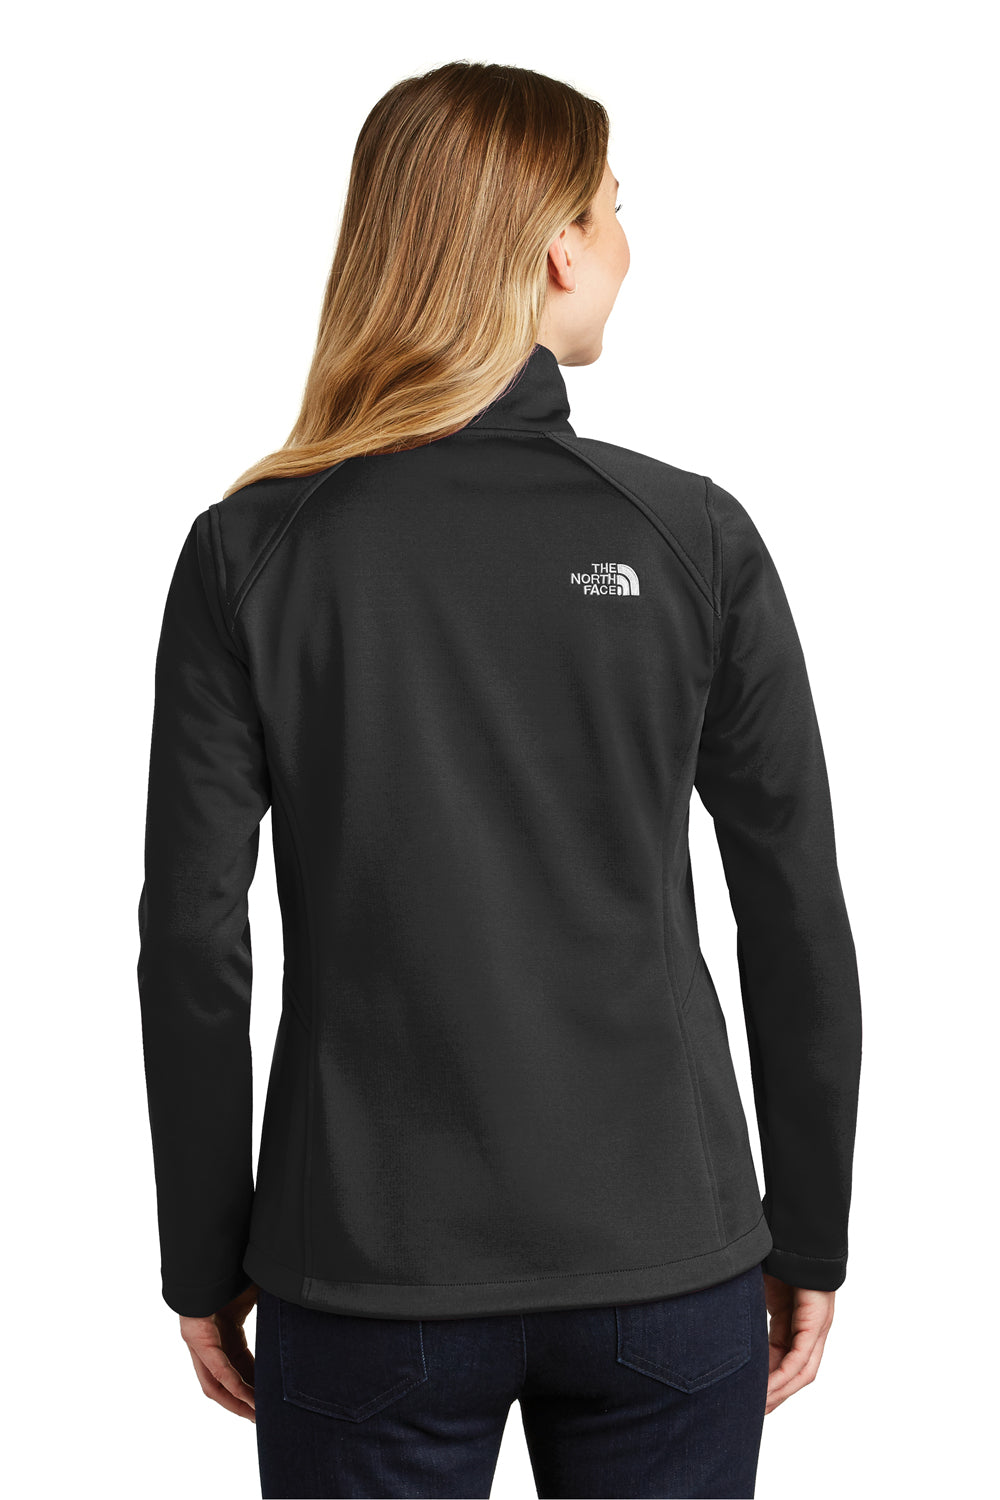 The North Face NF0A3LGY Womens Ridgeline Wind & Water Resistant Full Zip Jacket Black Back